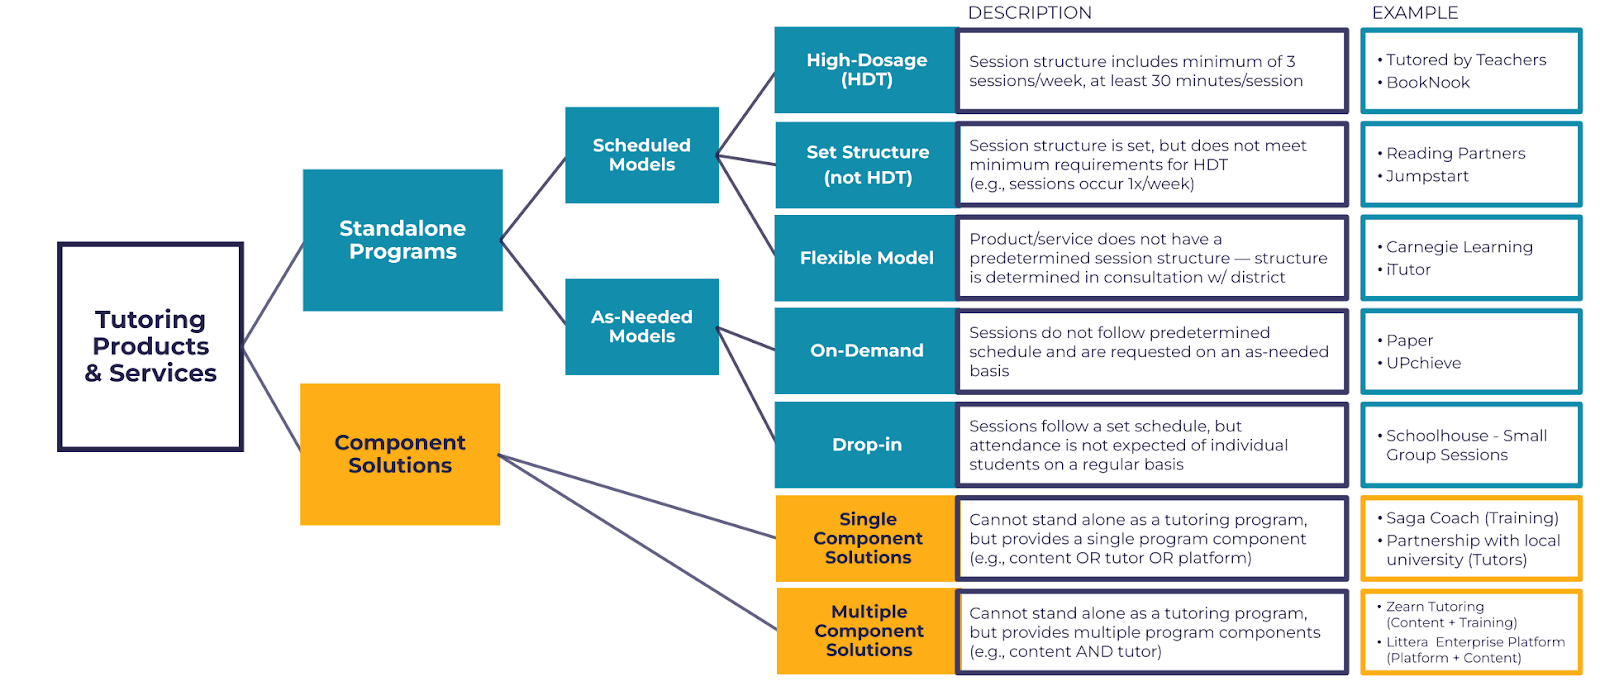 Resource Image Selecting Product Services Standalone Programs vs Component Solutions